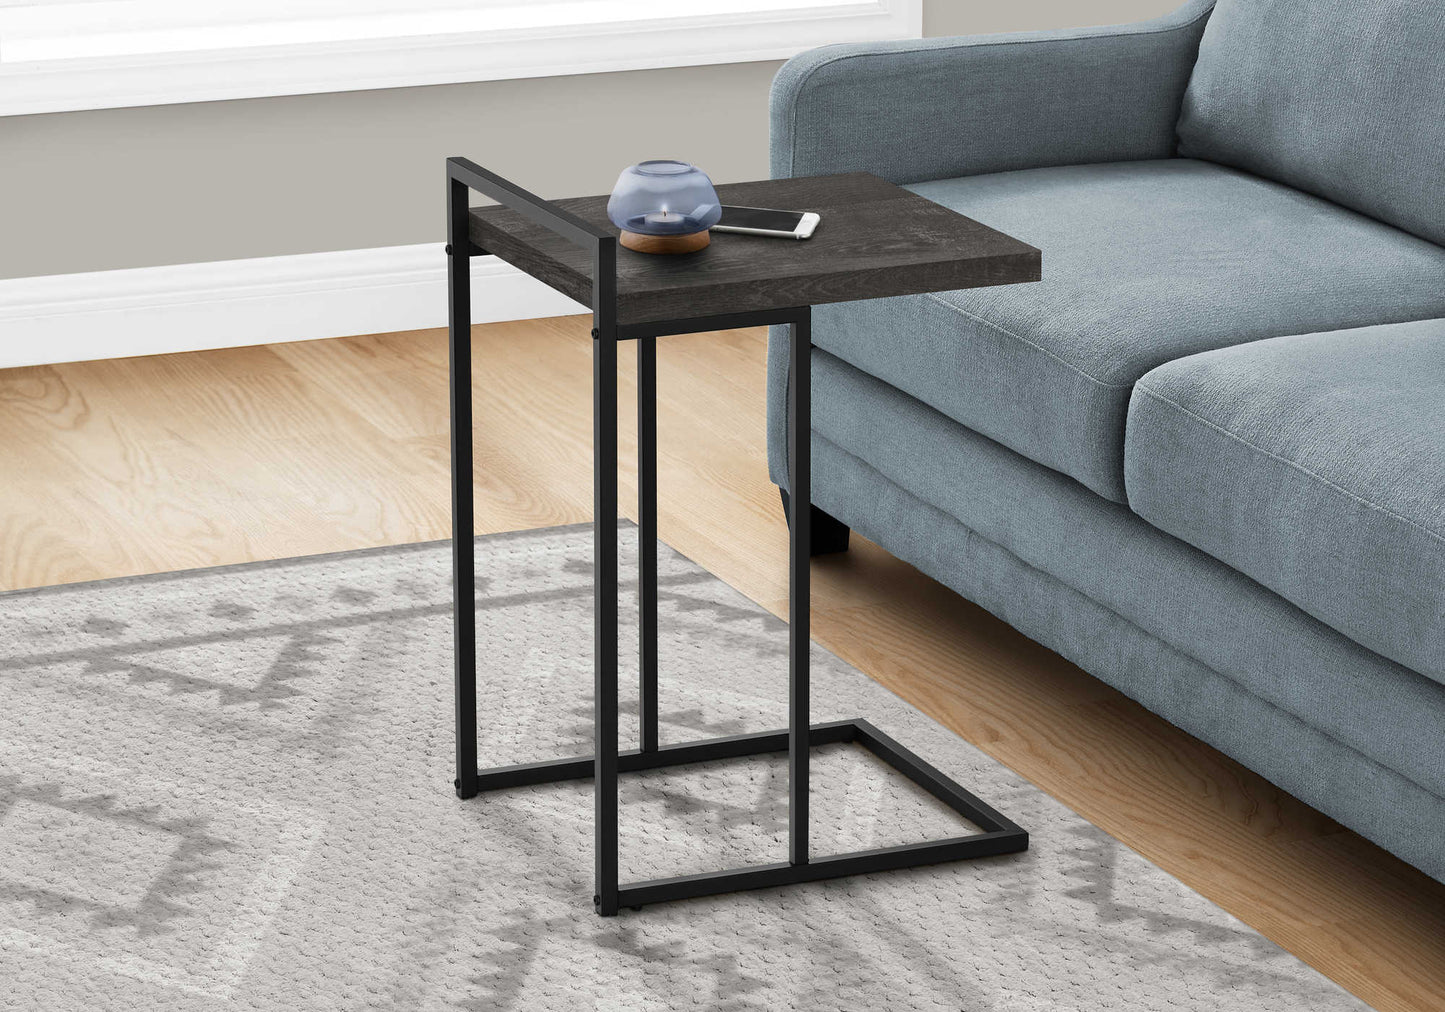 16"L/26.5"H Modern Laminate Bedroom Accent Table with Metal Frame